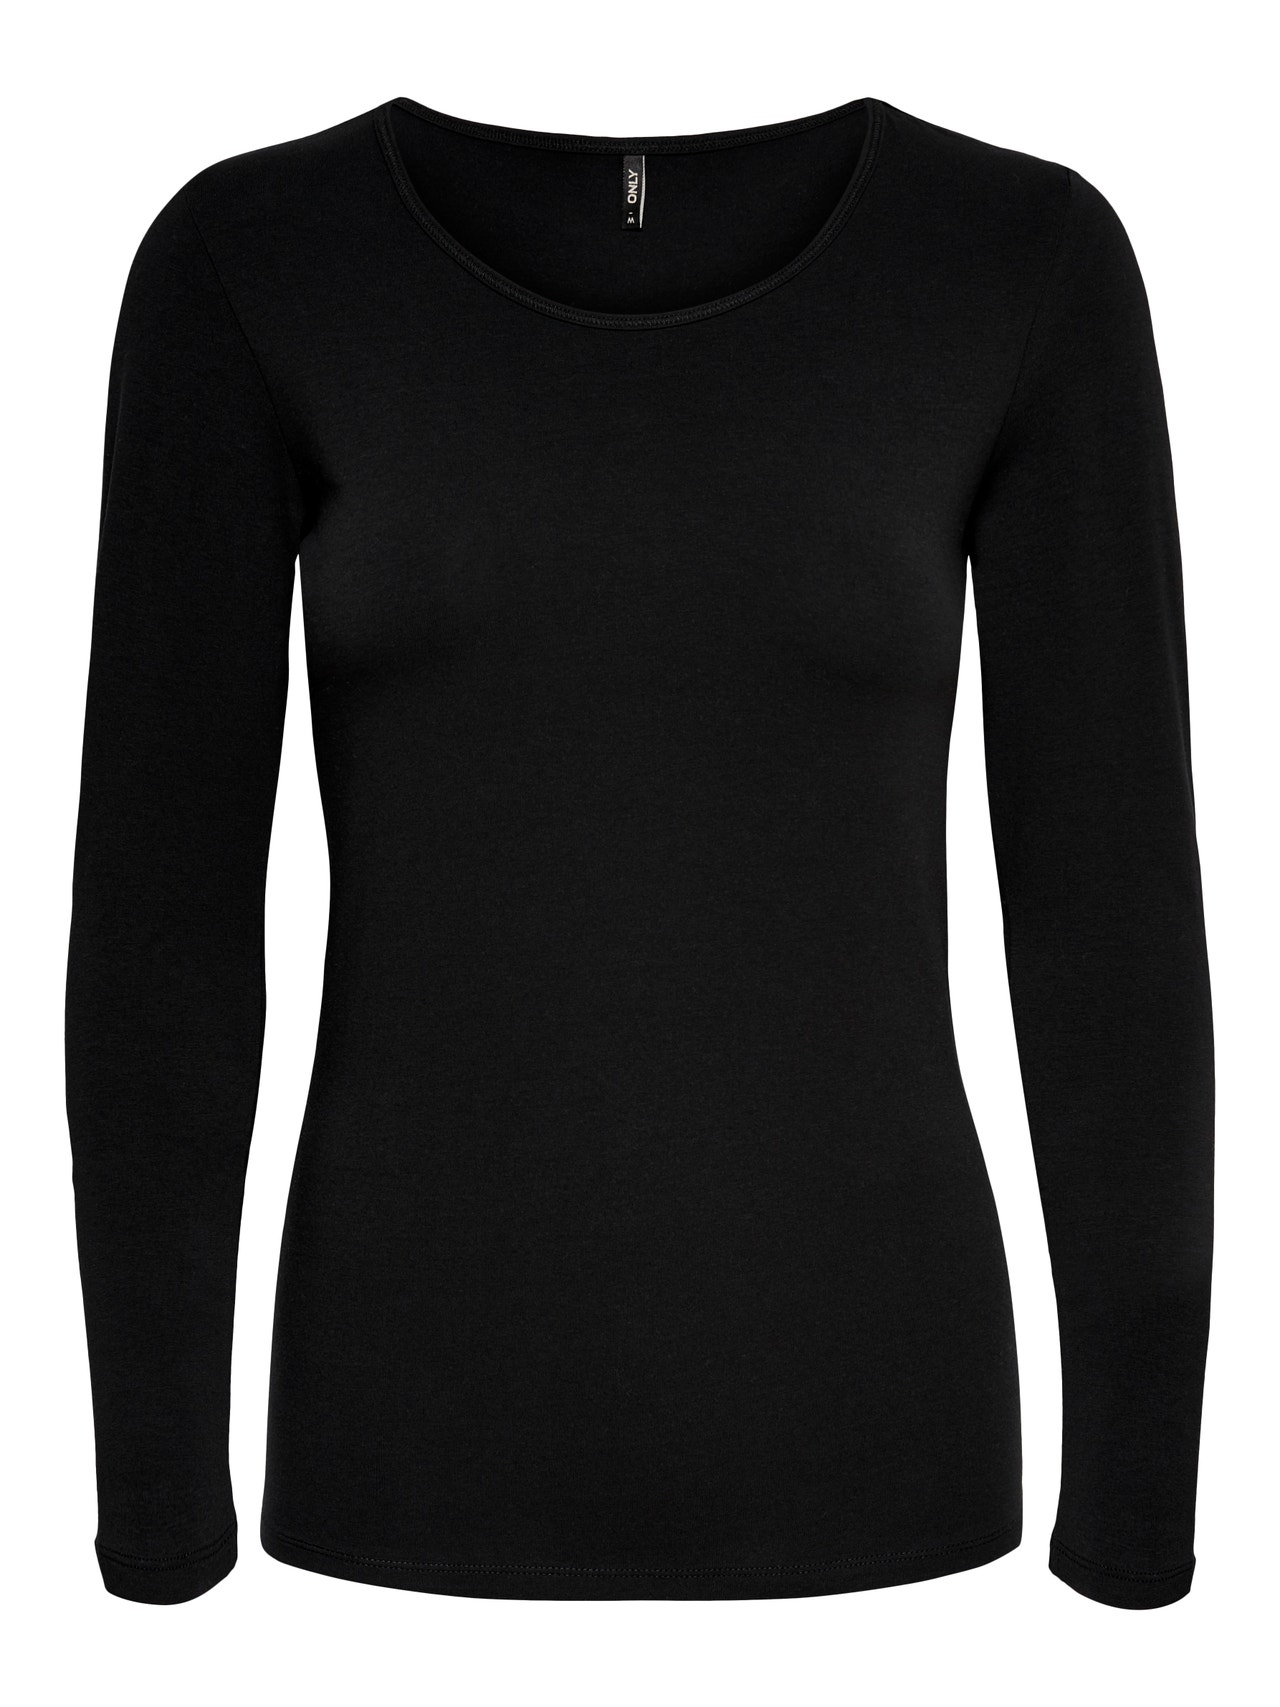 ONLY Basis Top -Black - 15204712